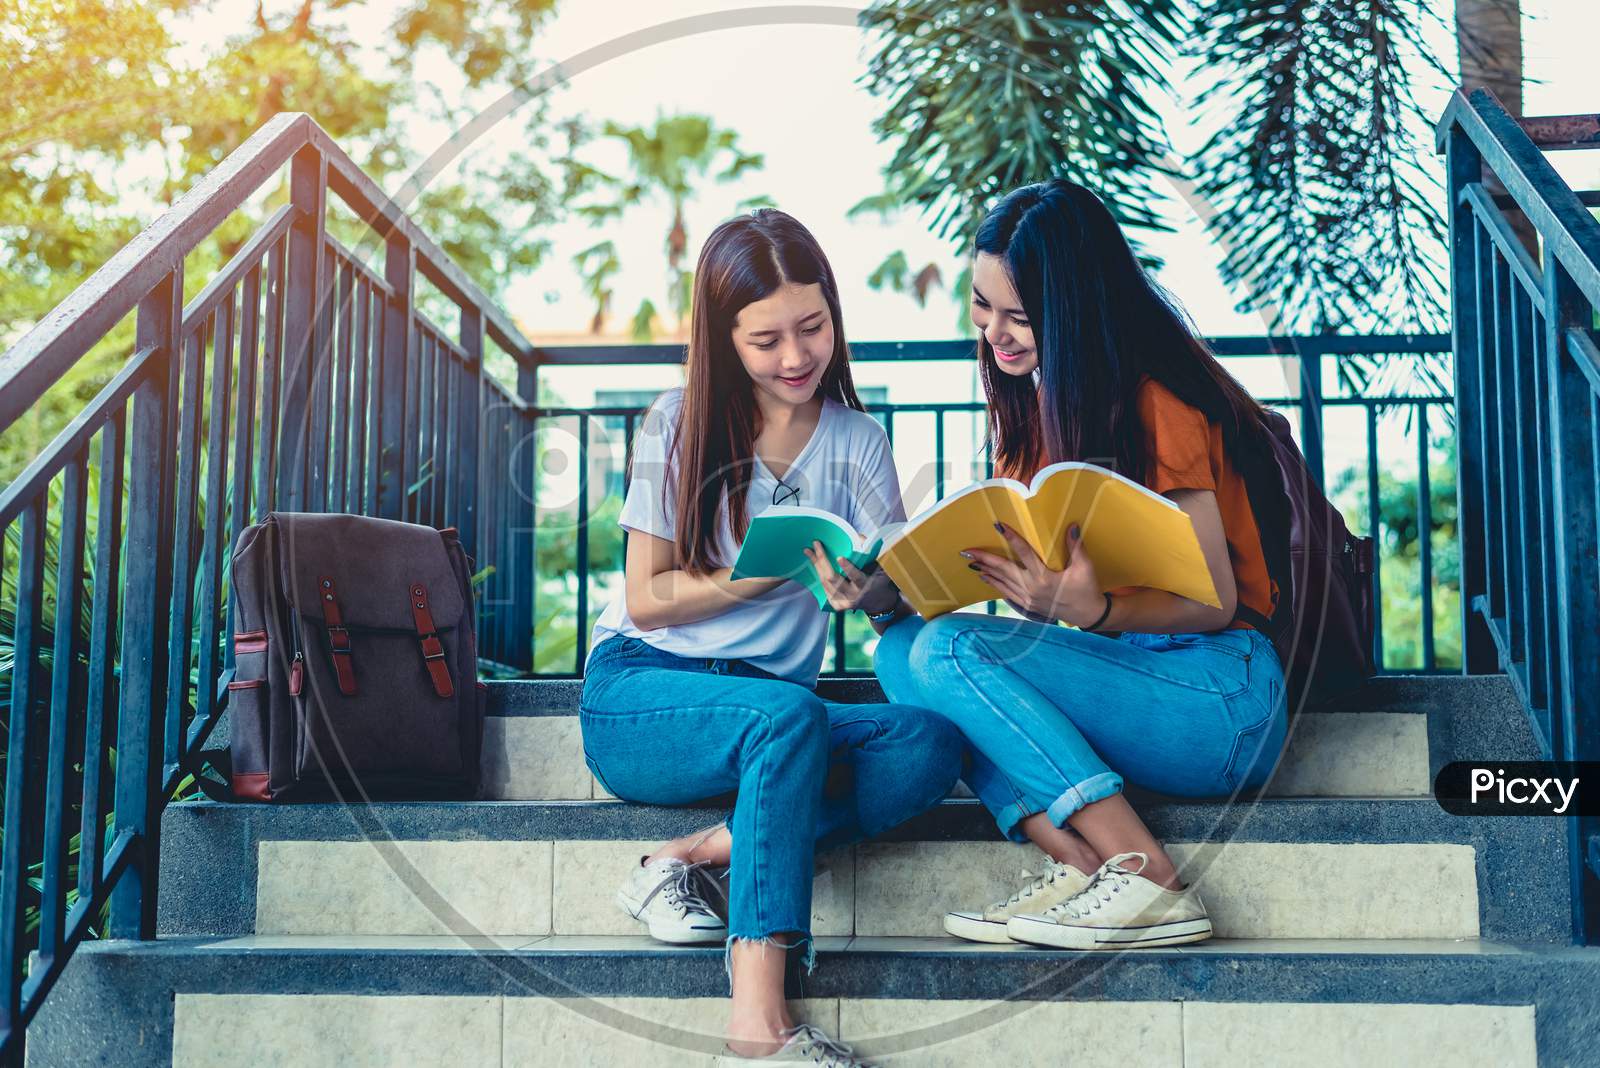 Two Asian Beauty Girls Reading And Tutoring Books For Final Examination Together. Student Smiling And Sitting On Stair. Education And Back To School Concept. Lifestyles And People Portrait Theme.